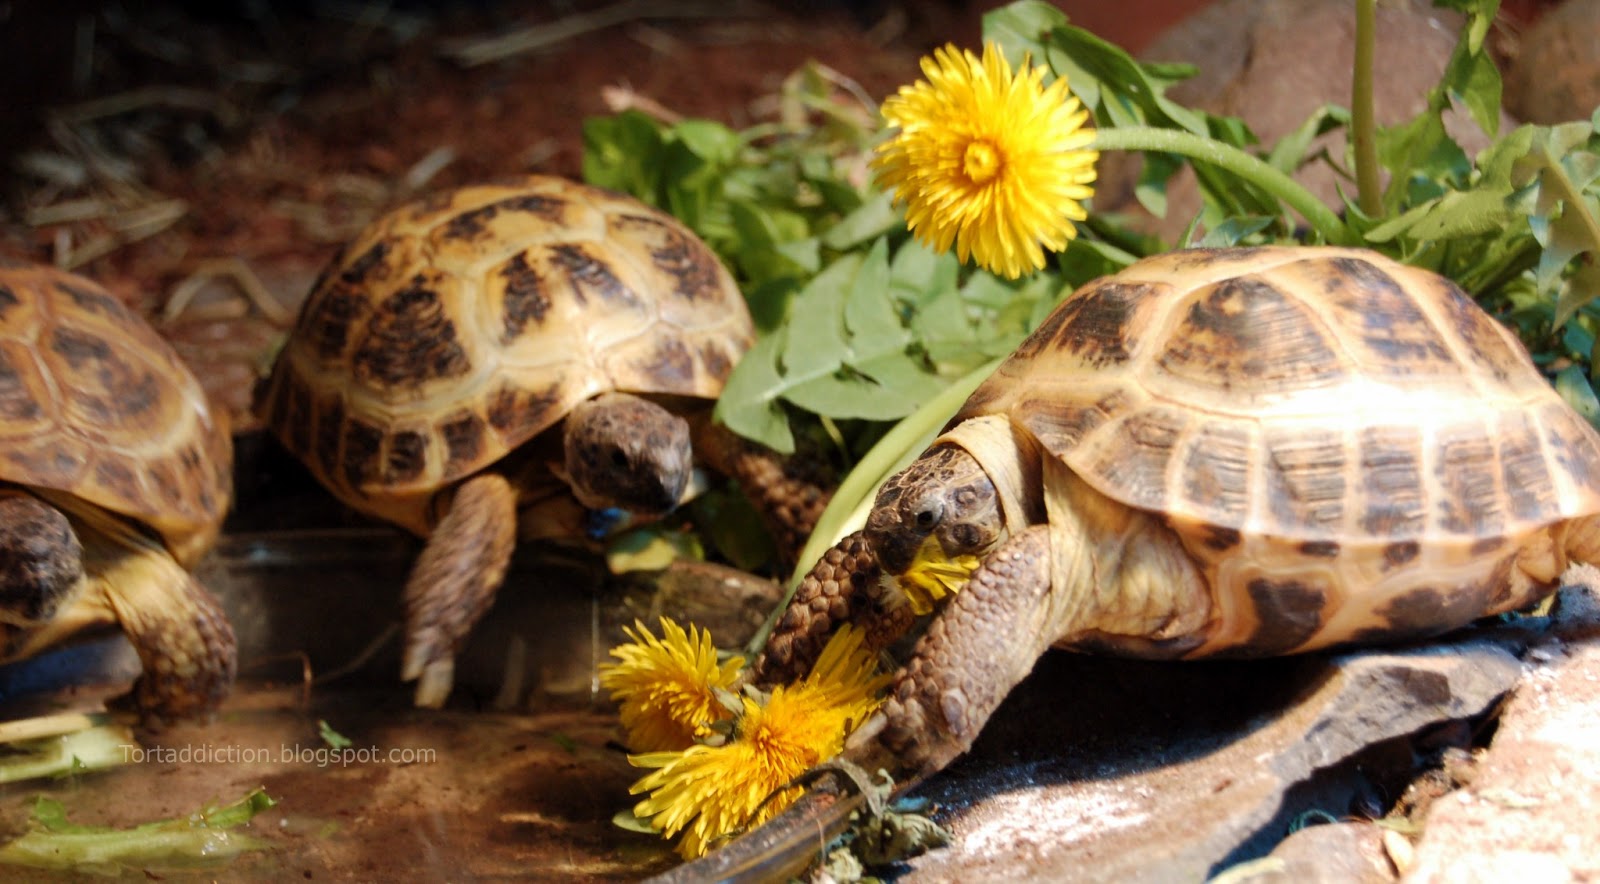 Russian Tortoise Diet [2021 Guide Shows Step-By-Step Instructions]